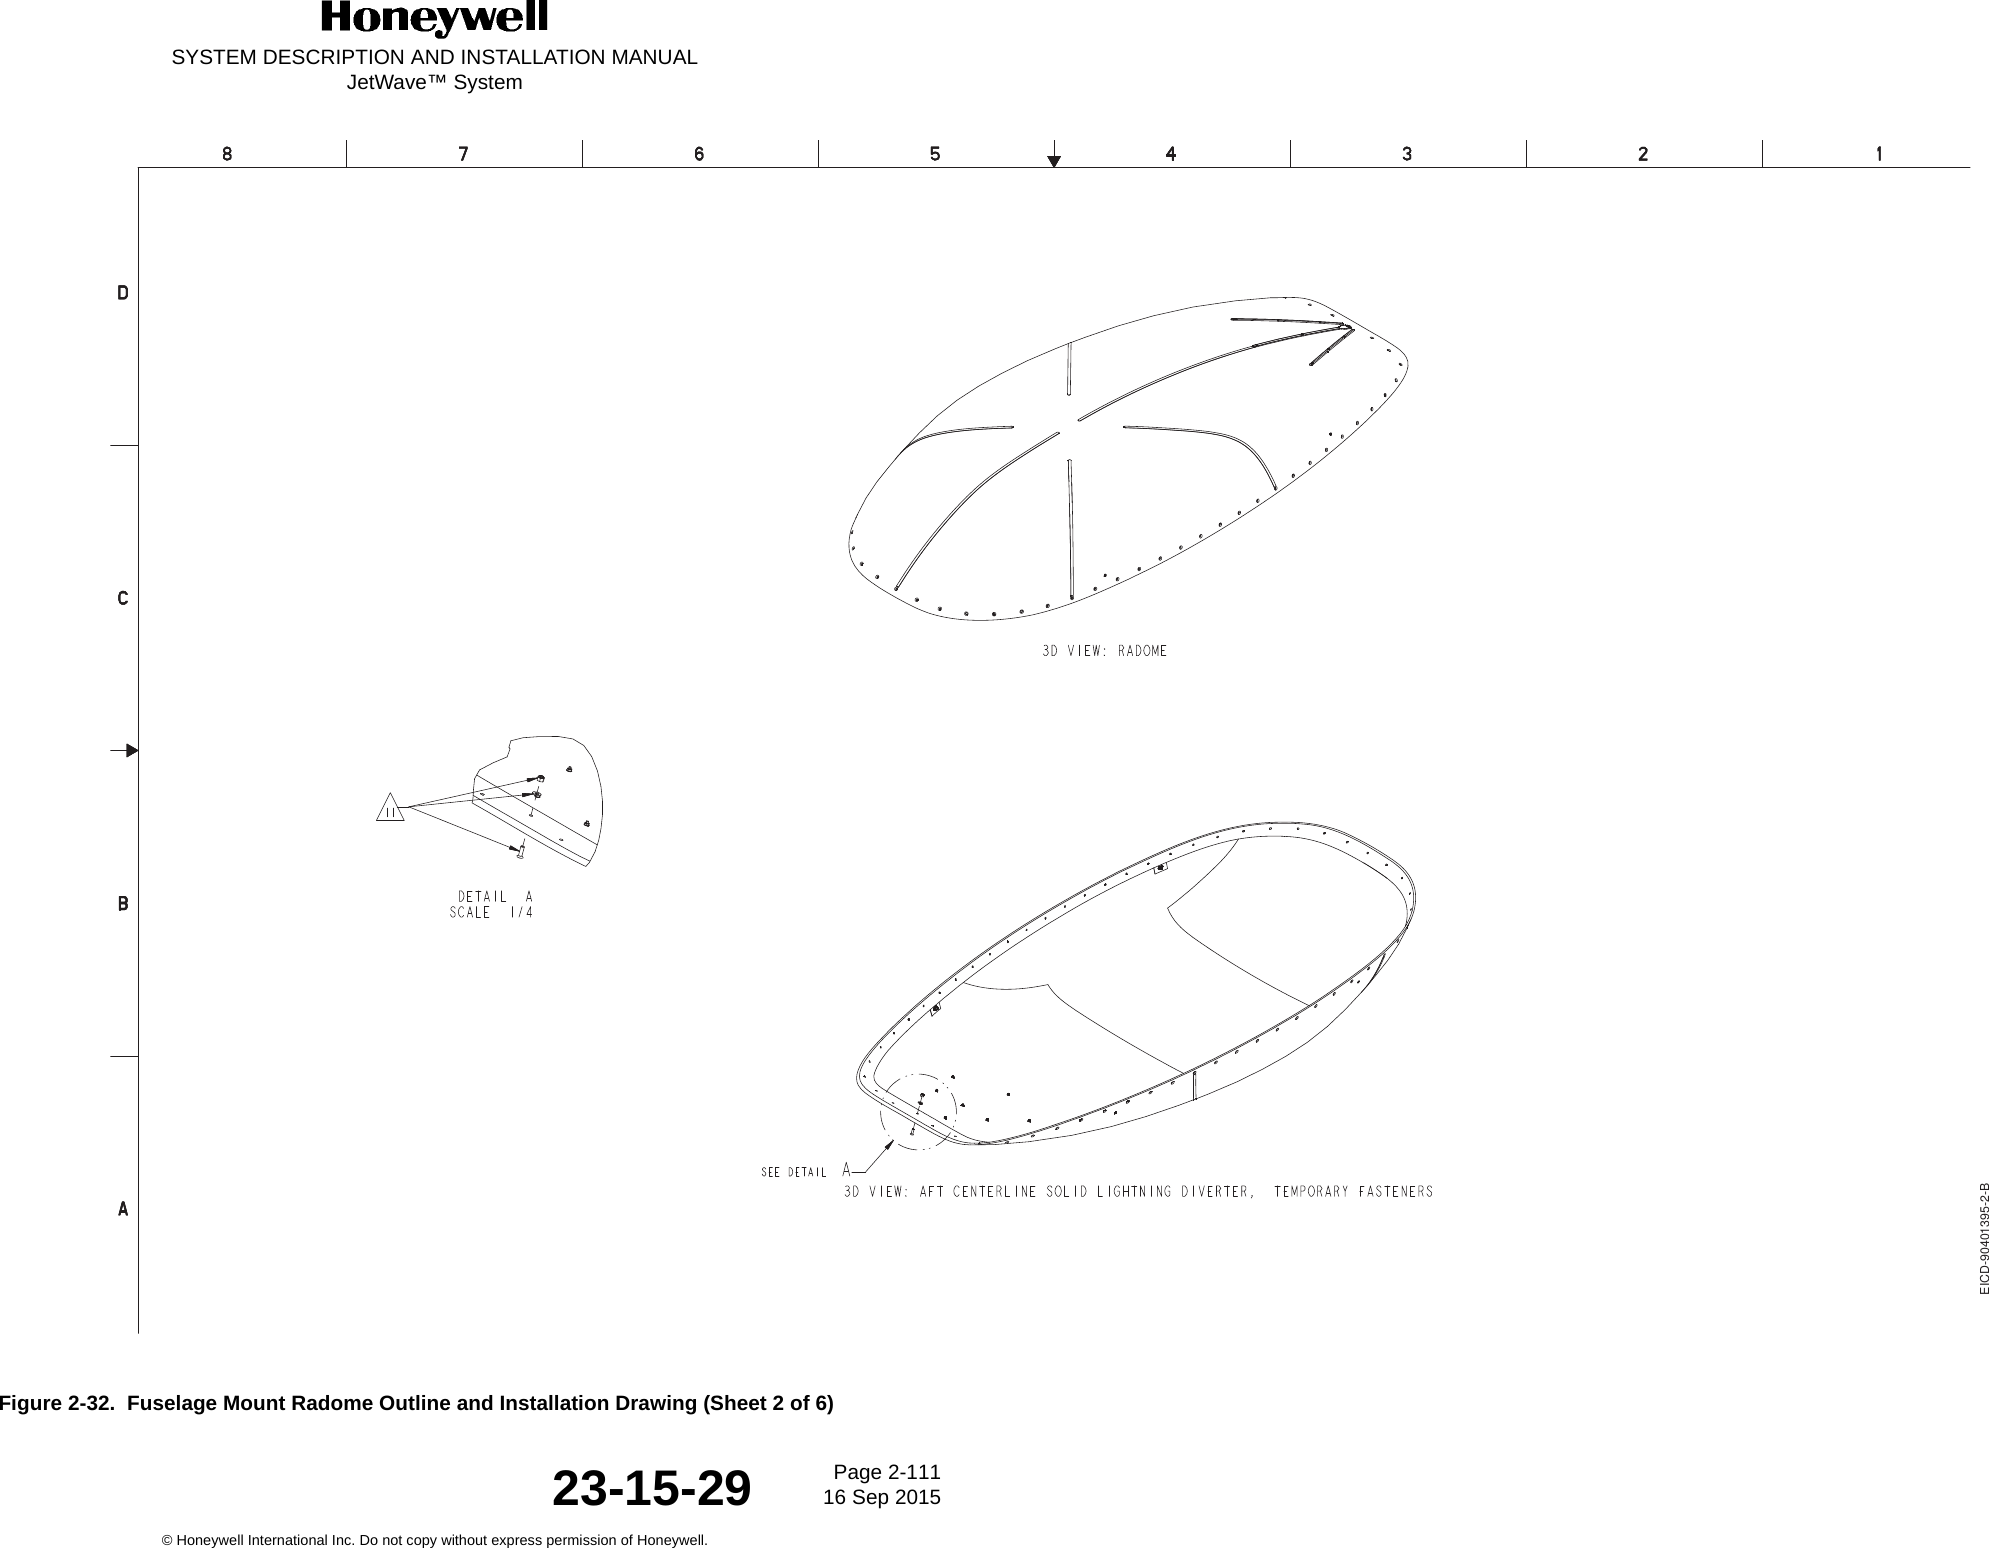 SYSTEM DESCRIPTION AND INSTALLATION MANUALJetWave™ SystemPage 2-111 16 Sep 2015© Honeywell International Inc. Do not copy without express permission of Honeywell.23-15-29Figure 2-32.  Fuselage Mount Radome Outline and Installation Drawing (Sheet 2 of 6) EICD-90401395-2-B